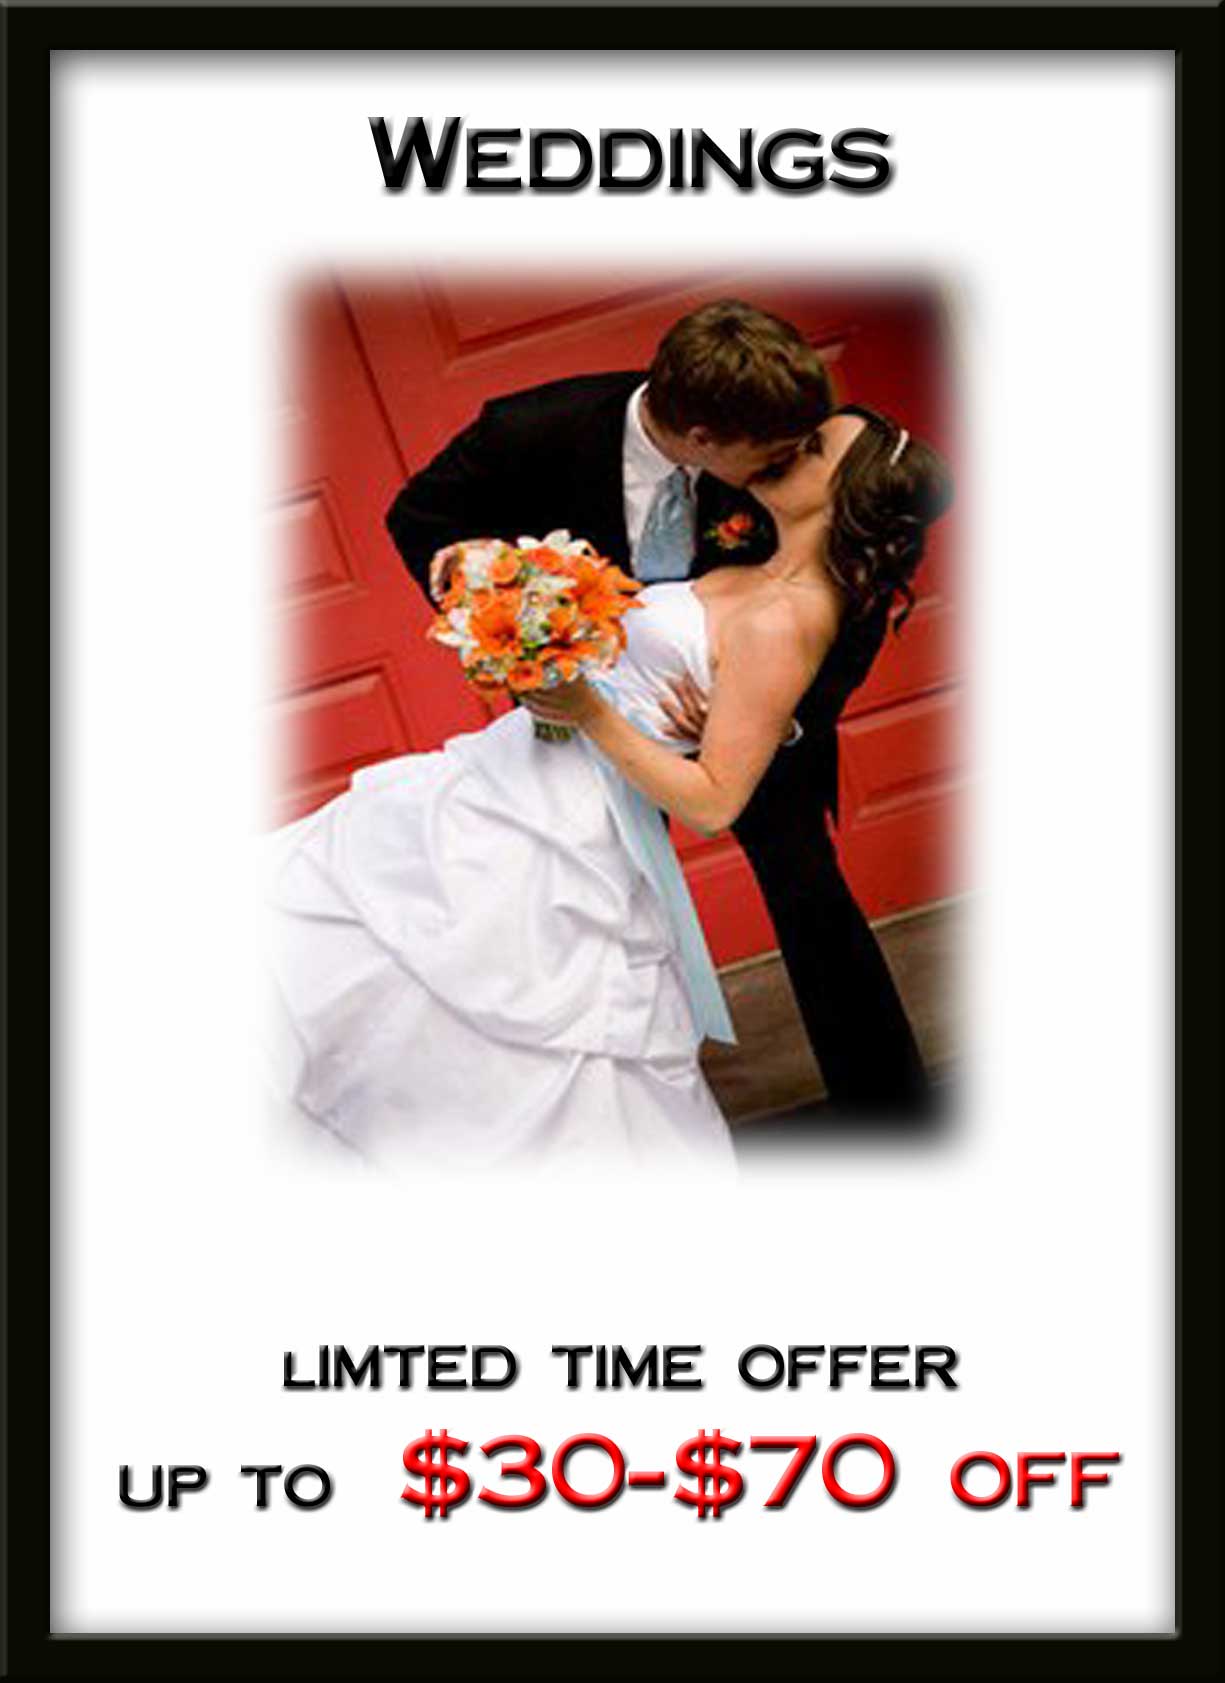 Wedding Specials - Tuxedos and Formal Wear - Lowell, MA